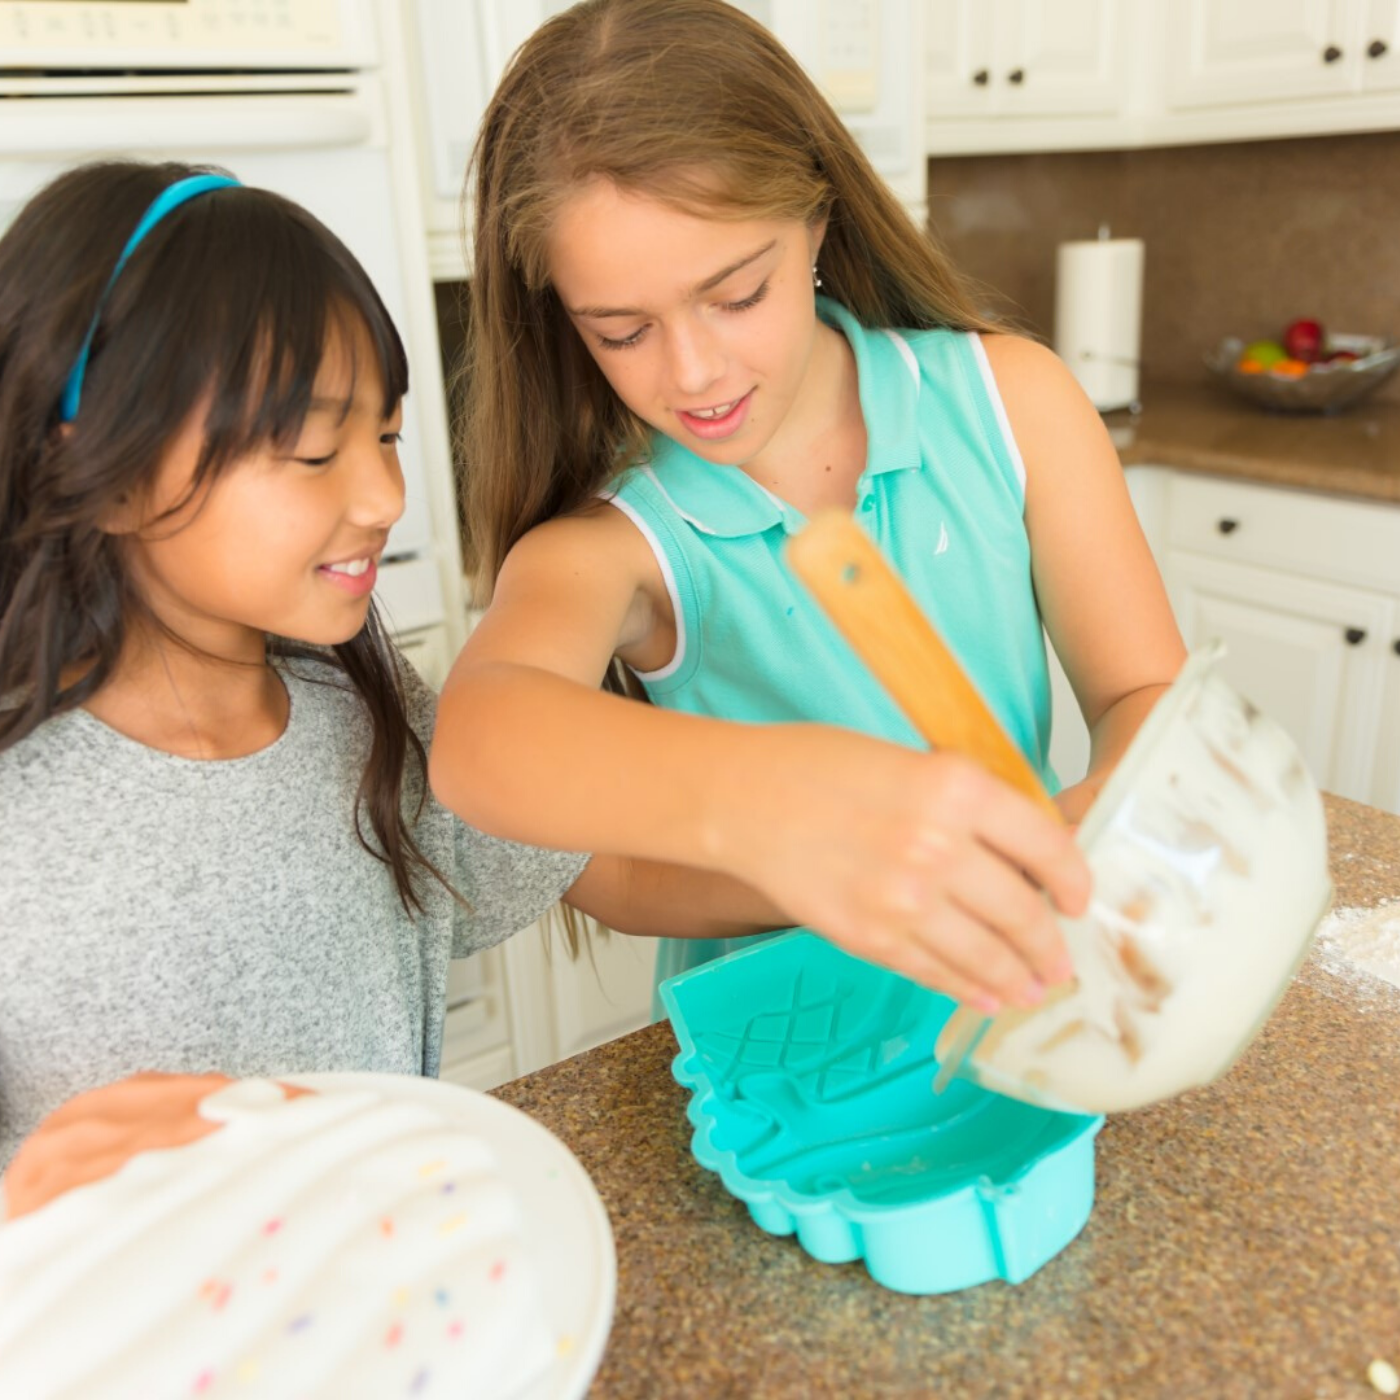 Lifestyle photo of children pouring batter into the Ice cream cone shaped cake mold.